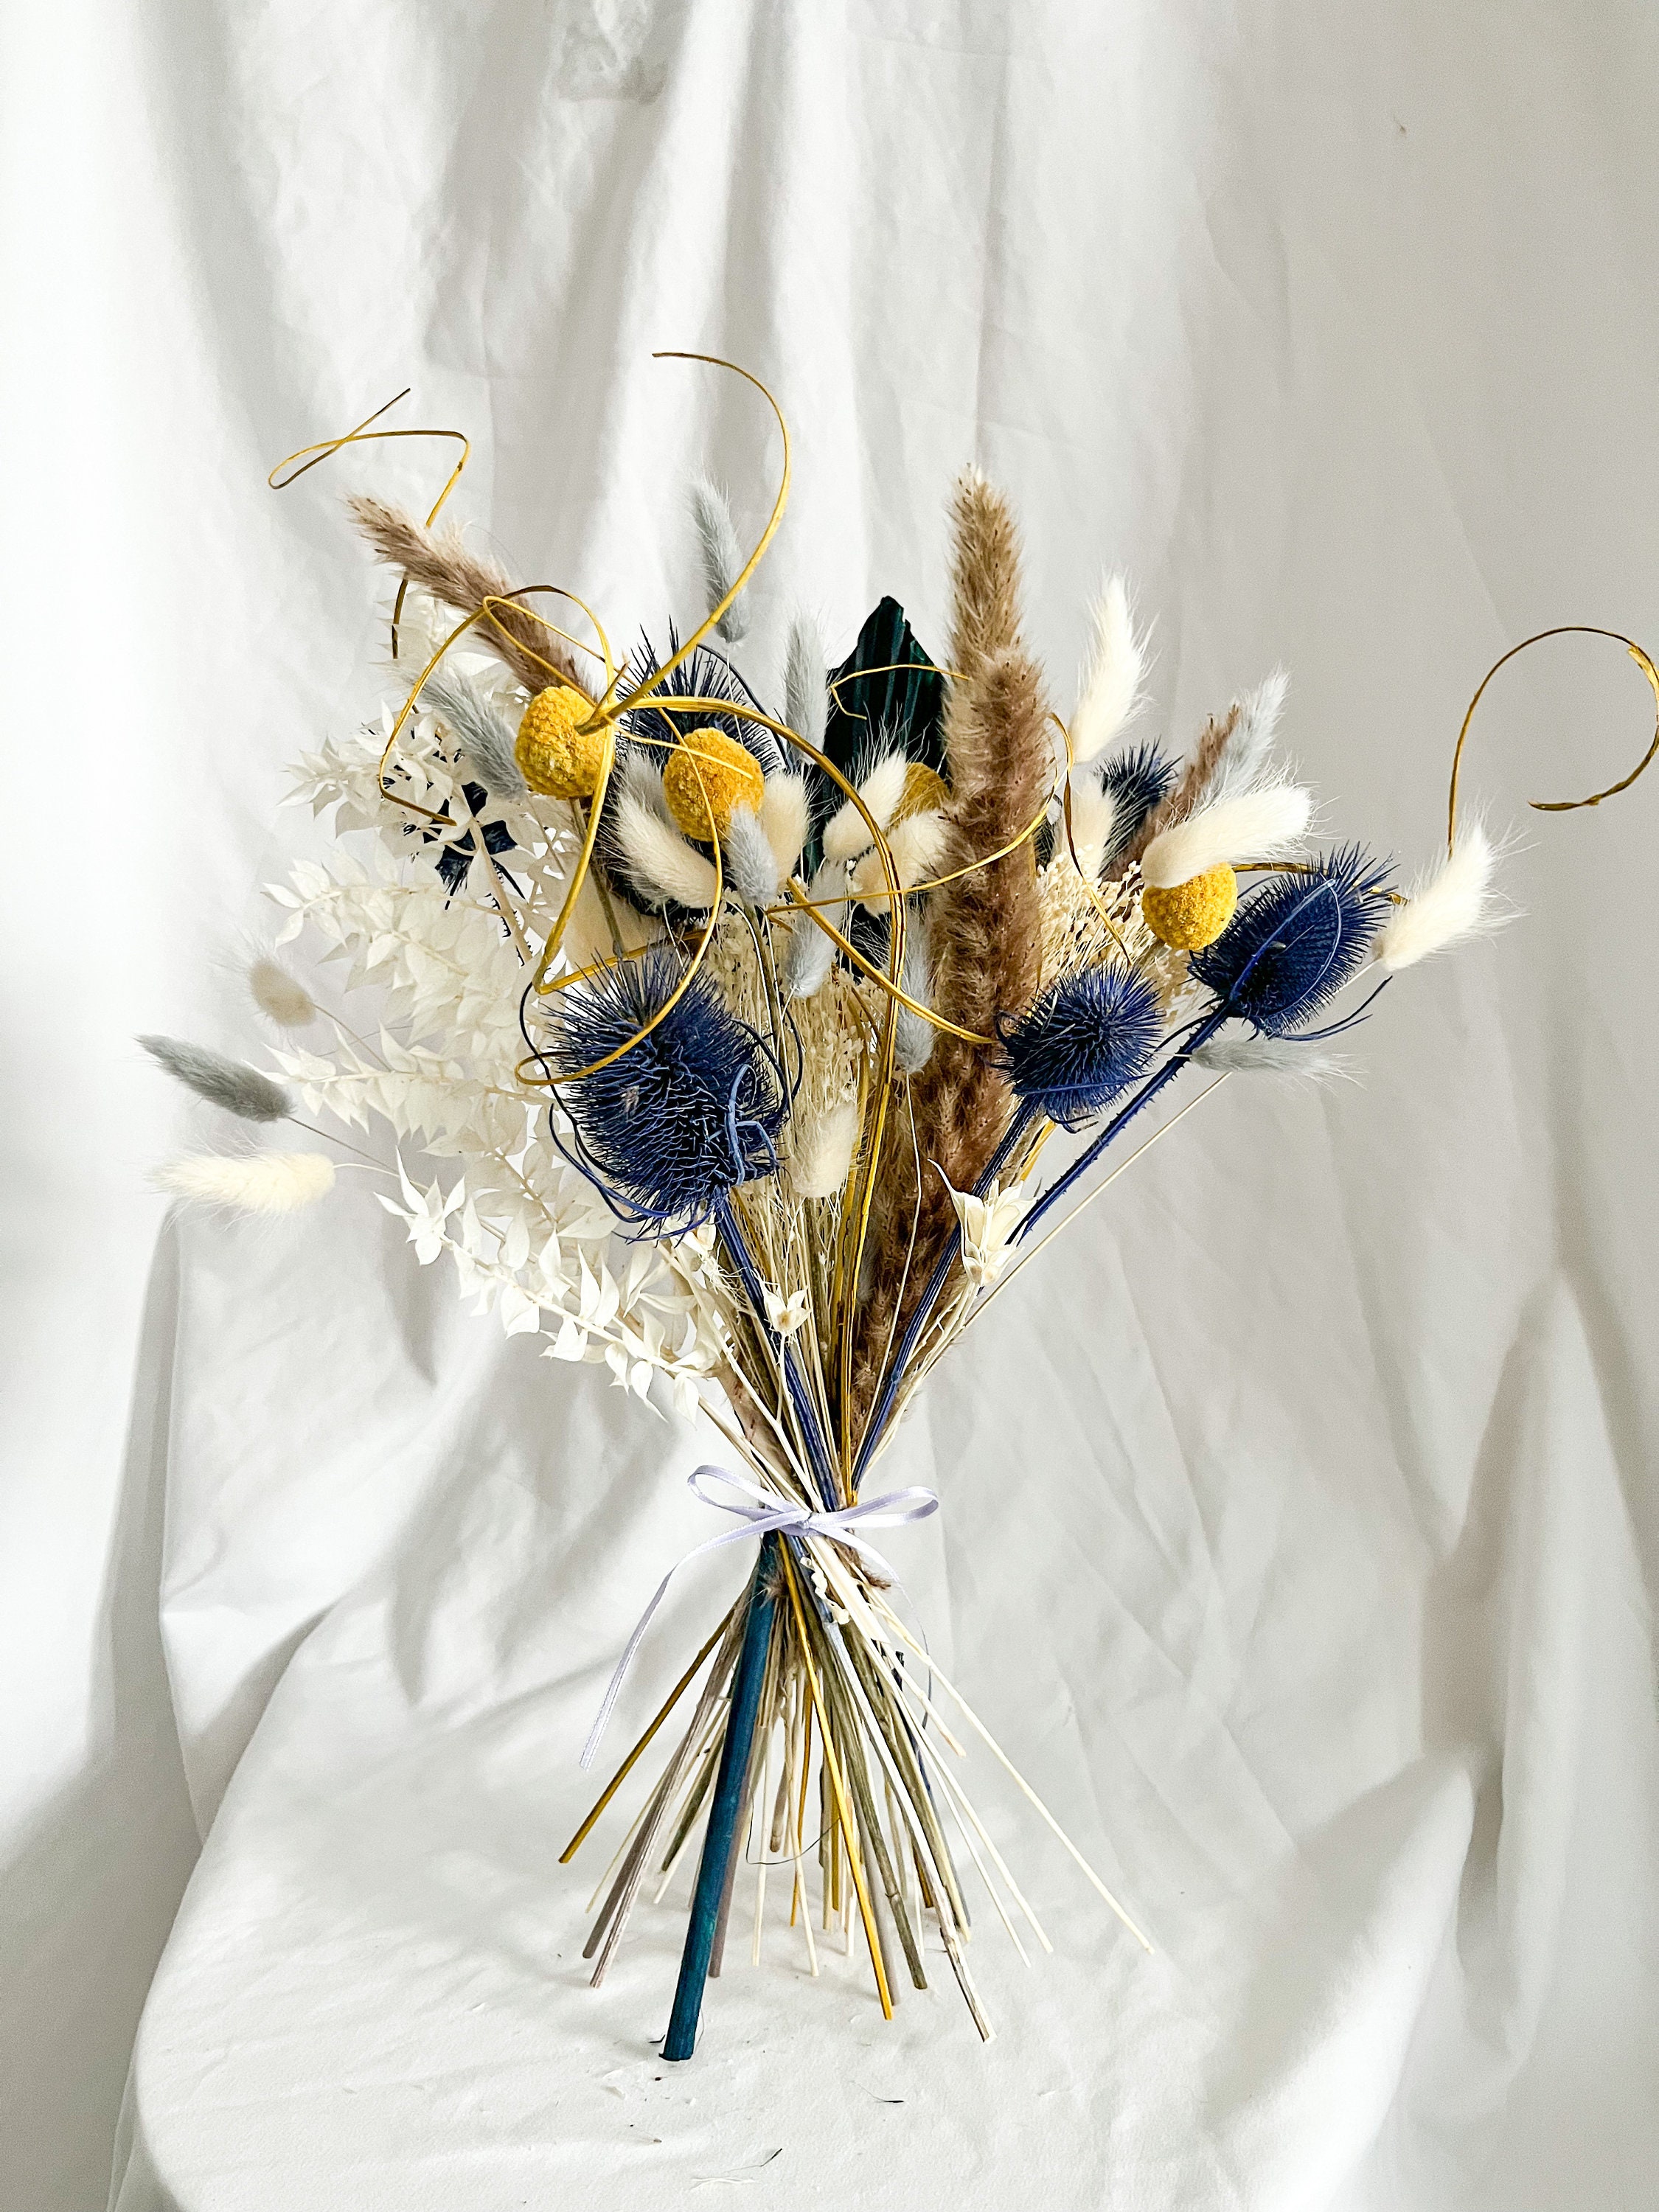 Mini Dried Flower Bouquet With Vase hello Beauty With Gift Tag